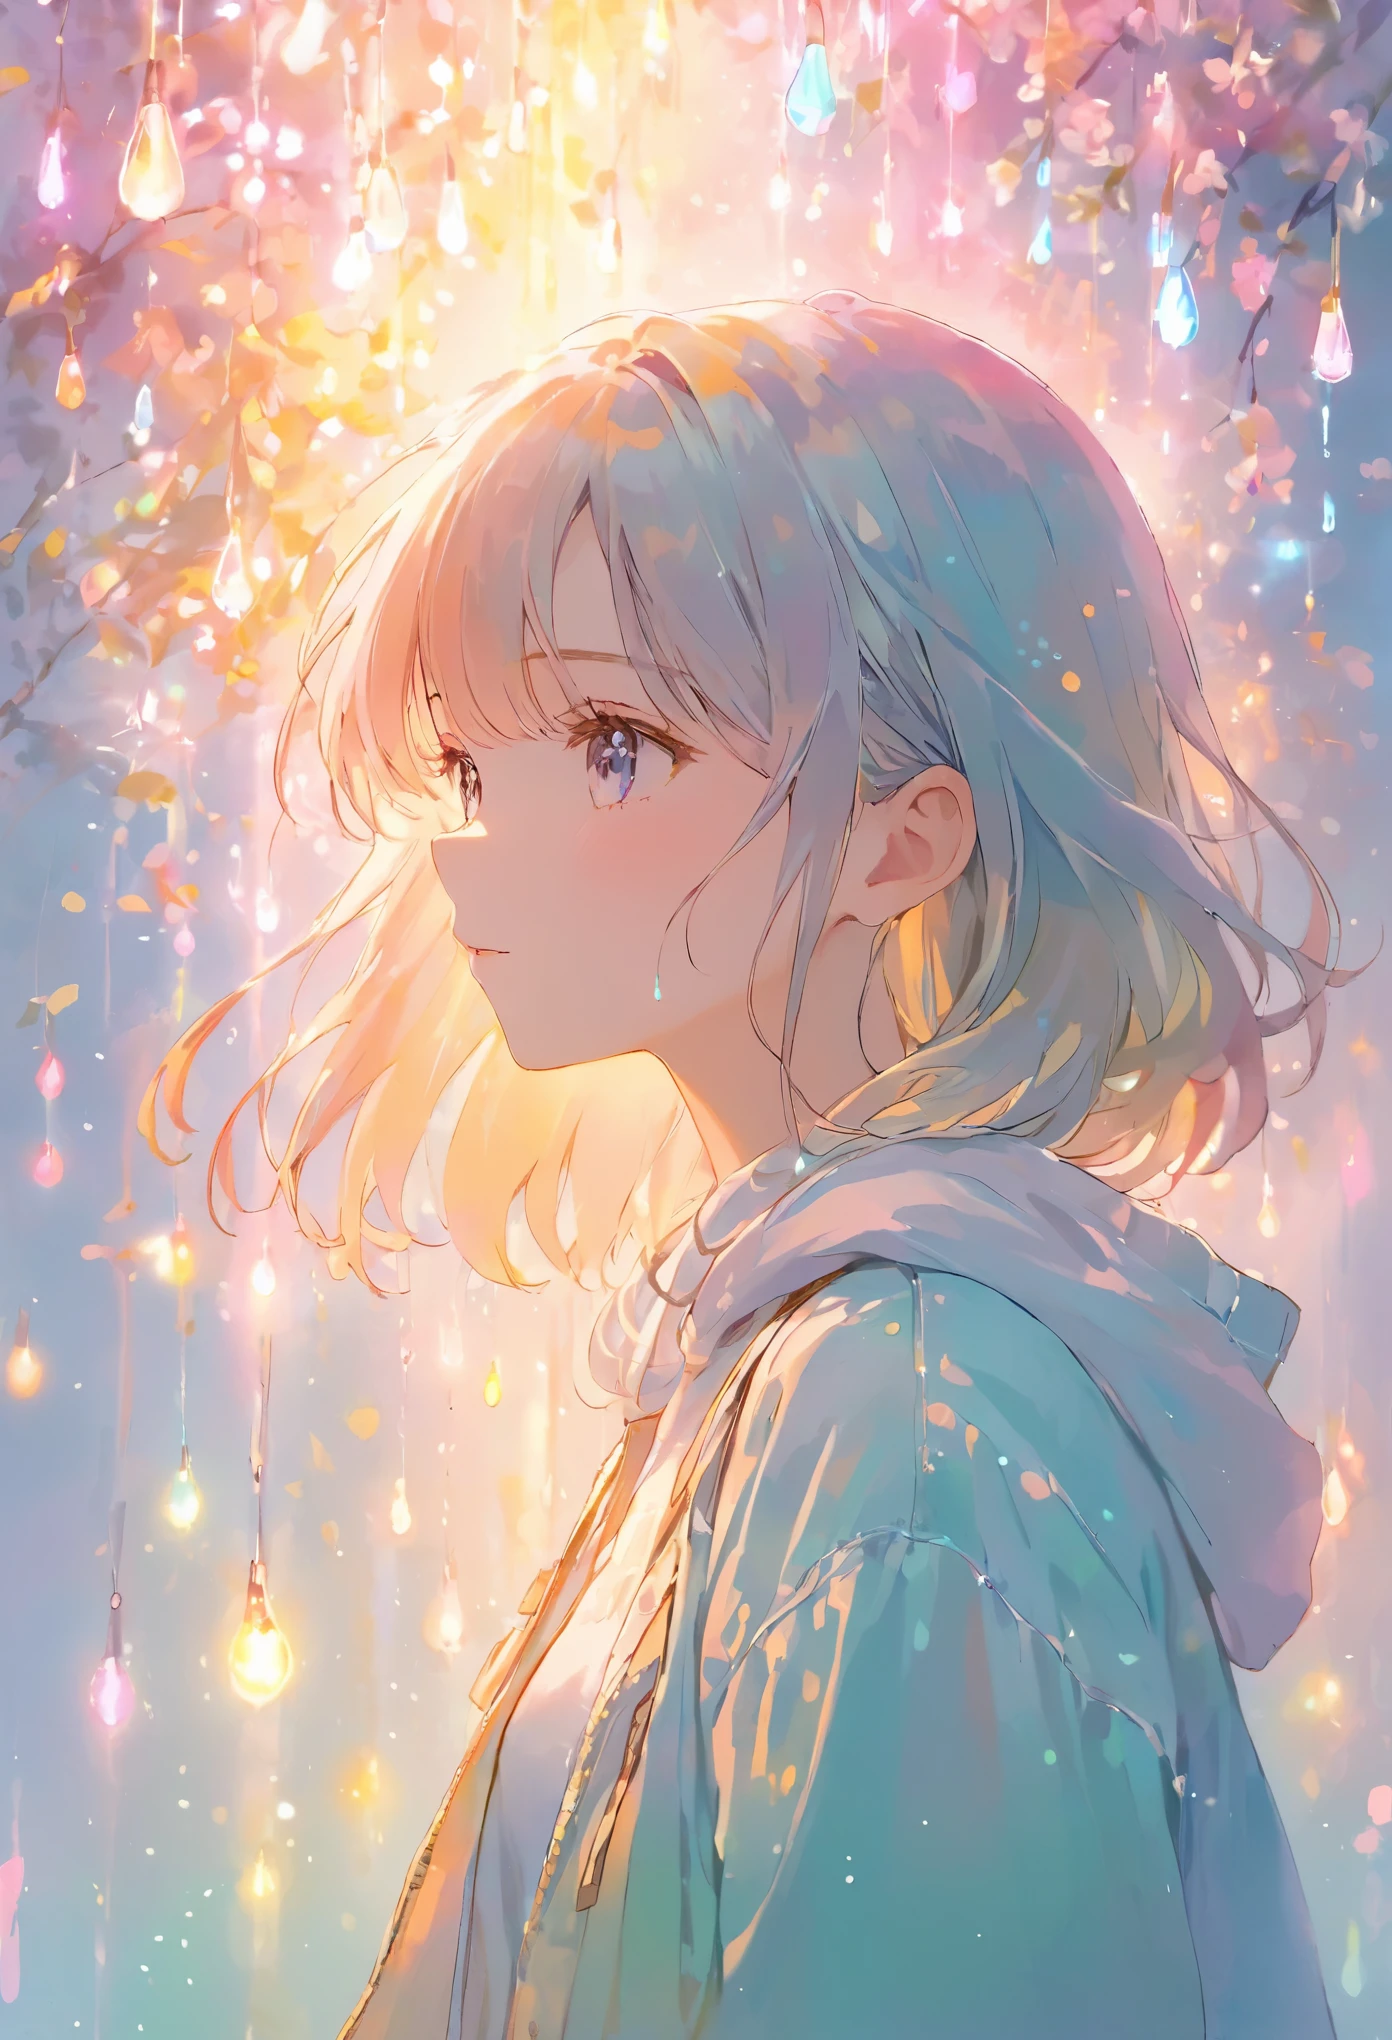 a girl, luminous design, pastel COLOR, ink drips, spring lights